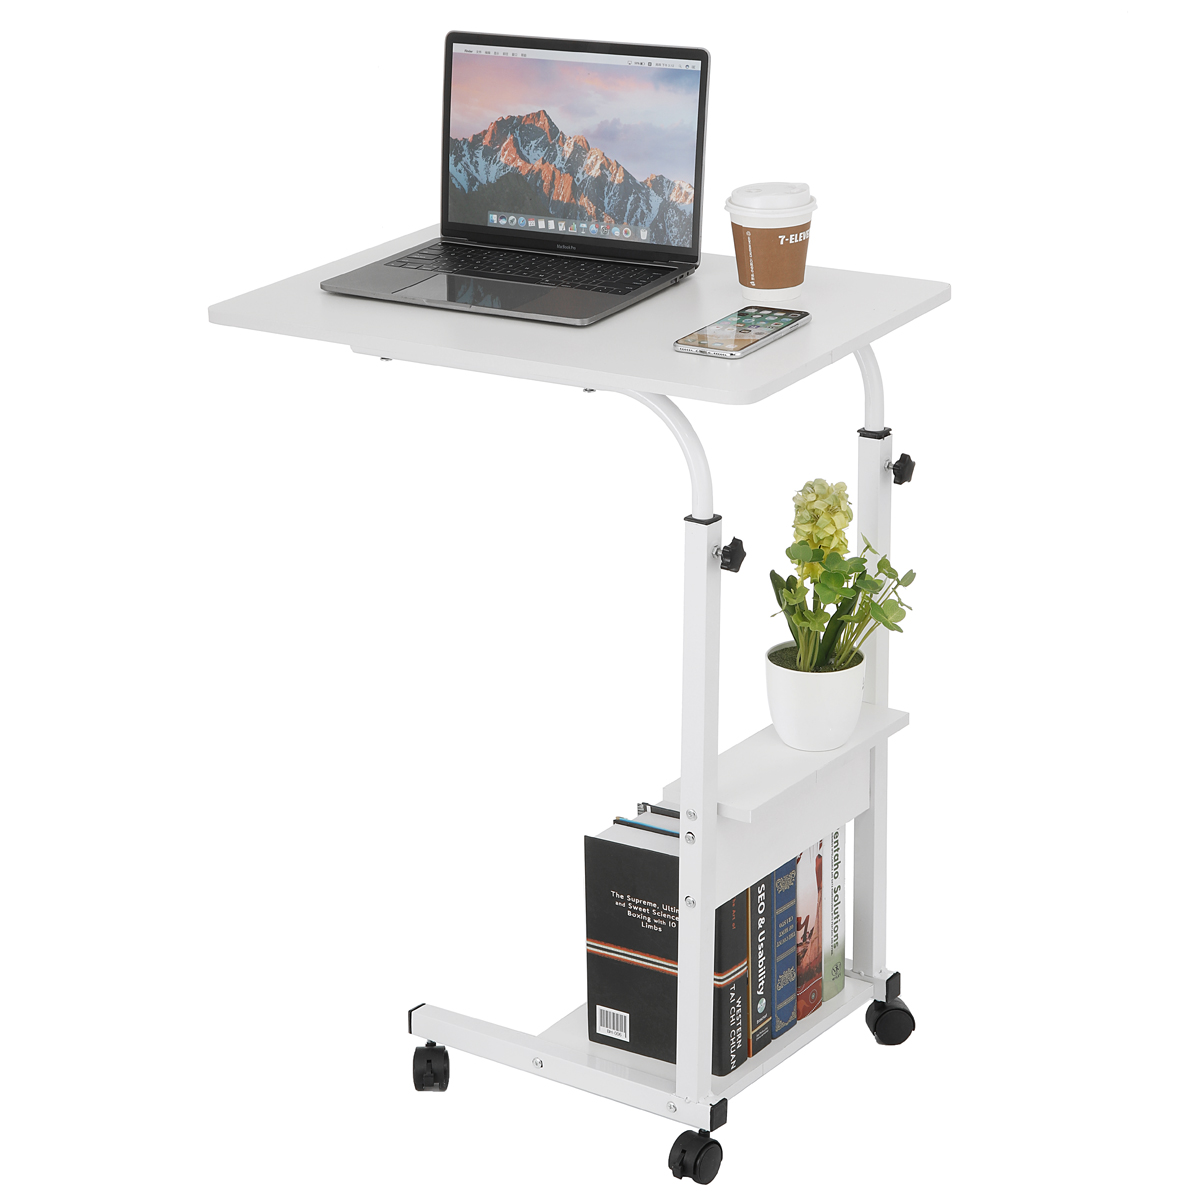 Movable-Laptop-Desk-Adjustable-Height-Computer-Notebook-Desk-Writing-Study-Table-Bedside-Tray-with-2-1750182-10